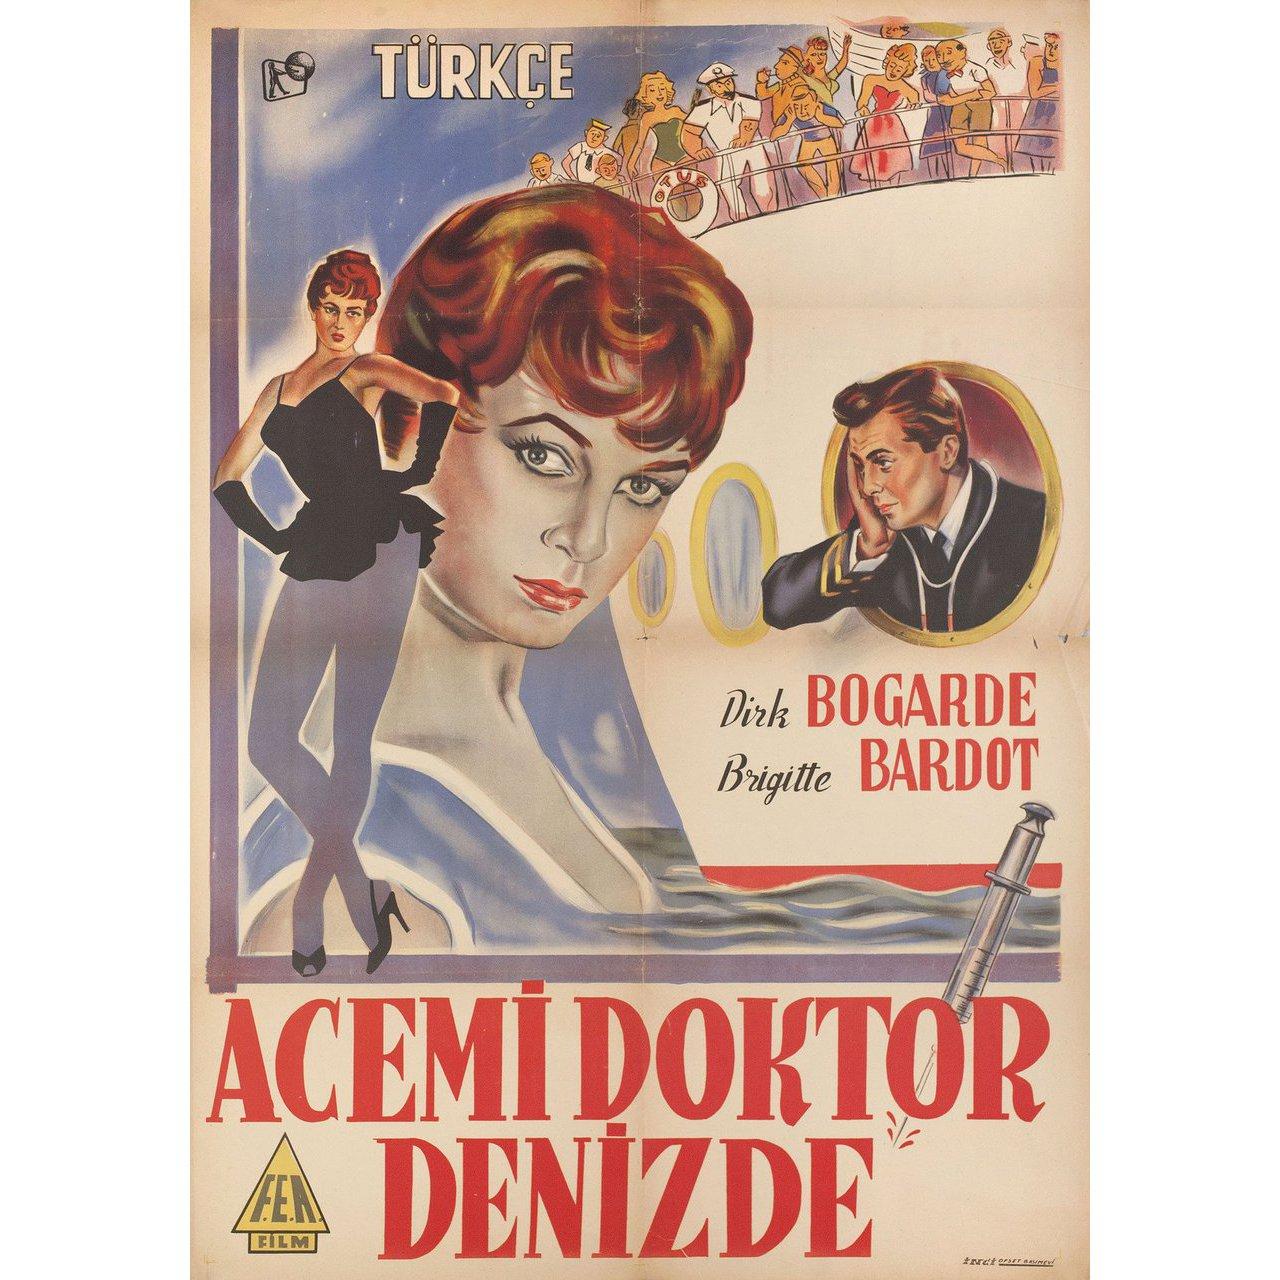 Original 1950s Turkish B1 poster for the film Doctor at Sea directed by Ralph Thomas with Dirk Bogarde / Brenda de Banzie / Brigitte Bardot / James Robertson Justice. Good-Very Good condition, folded with fold separation. Many original posters were